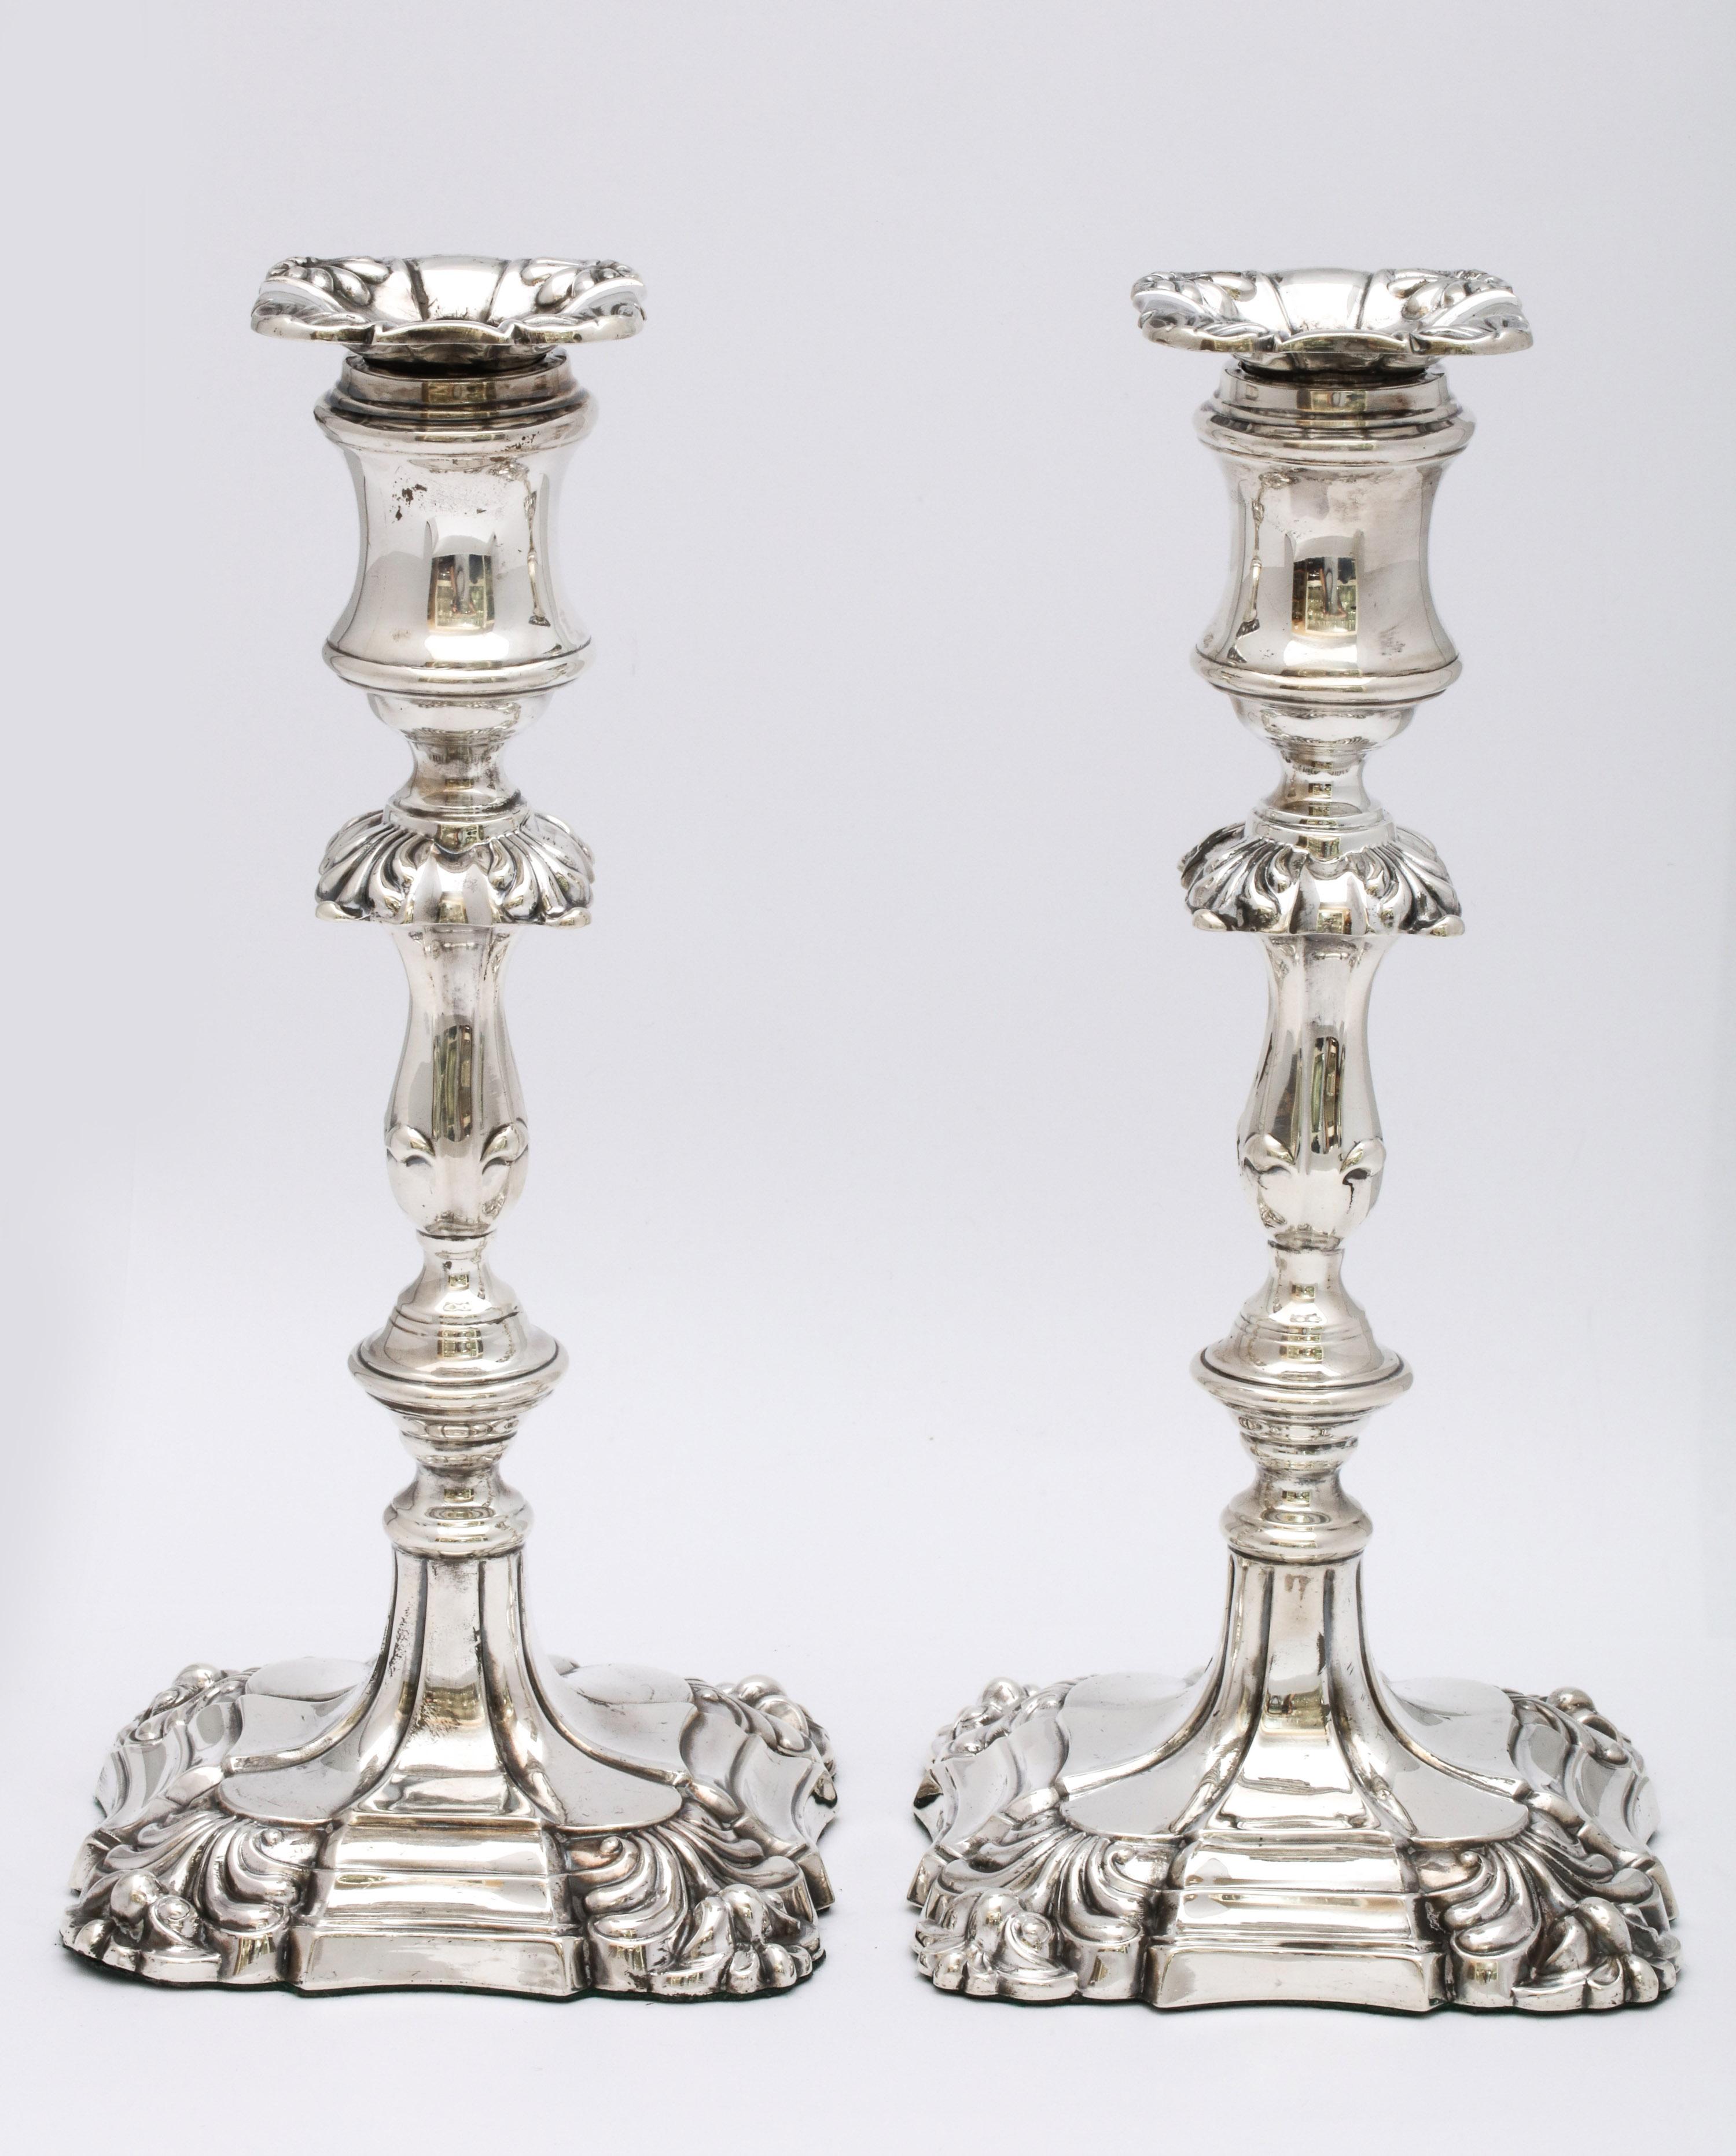 Pair of sterling silver, Georgian-style (George III) candlesticks, Sheffield, England, 1905, Walker and Hall - makers. Measures 9 1/4 inches high x 4 inches wide (at widest point) x 4 inches deep (at deepest point). Removable bobeches. Weighted.